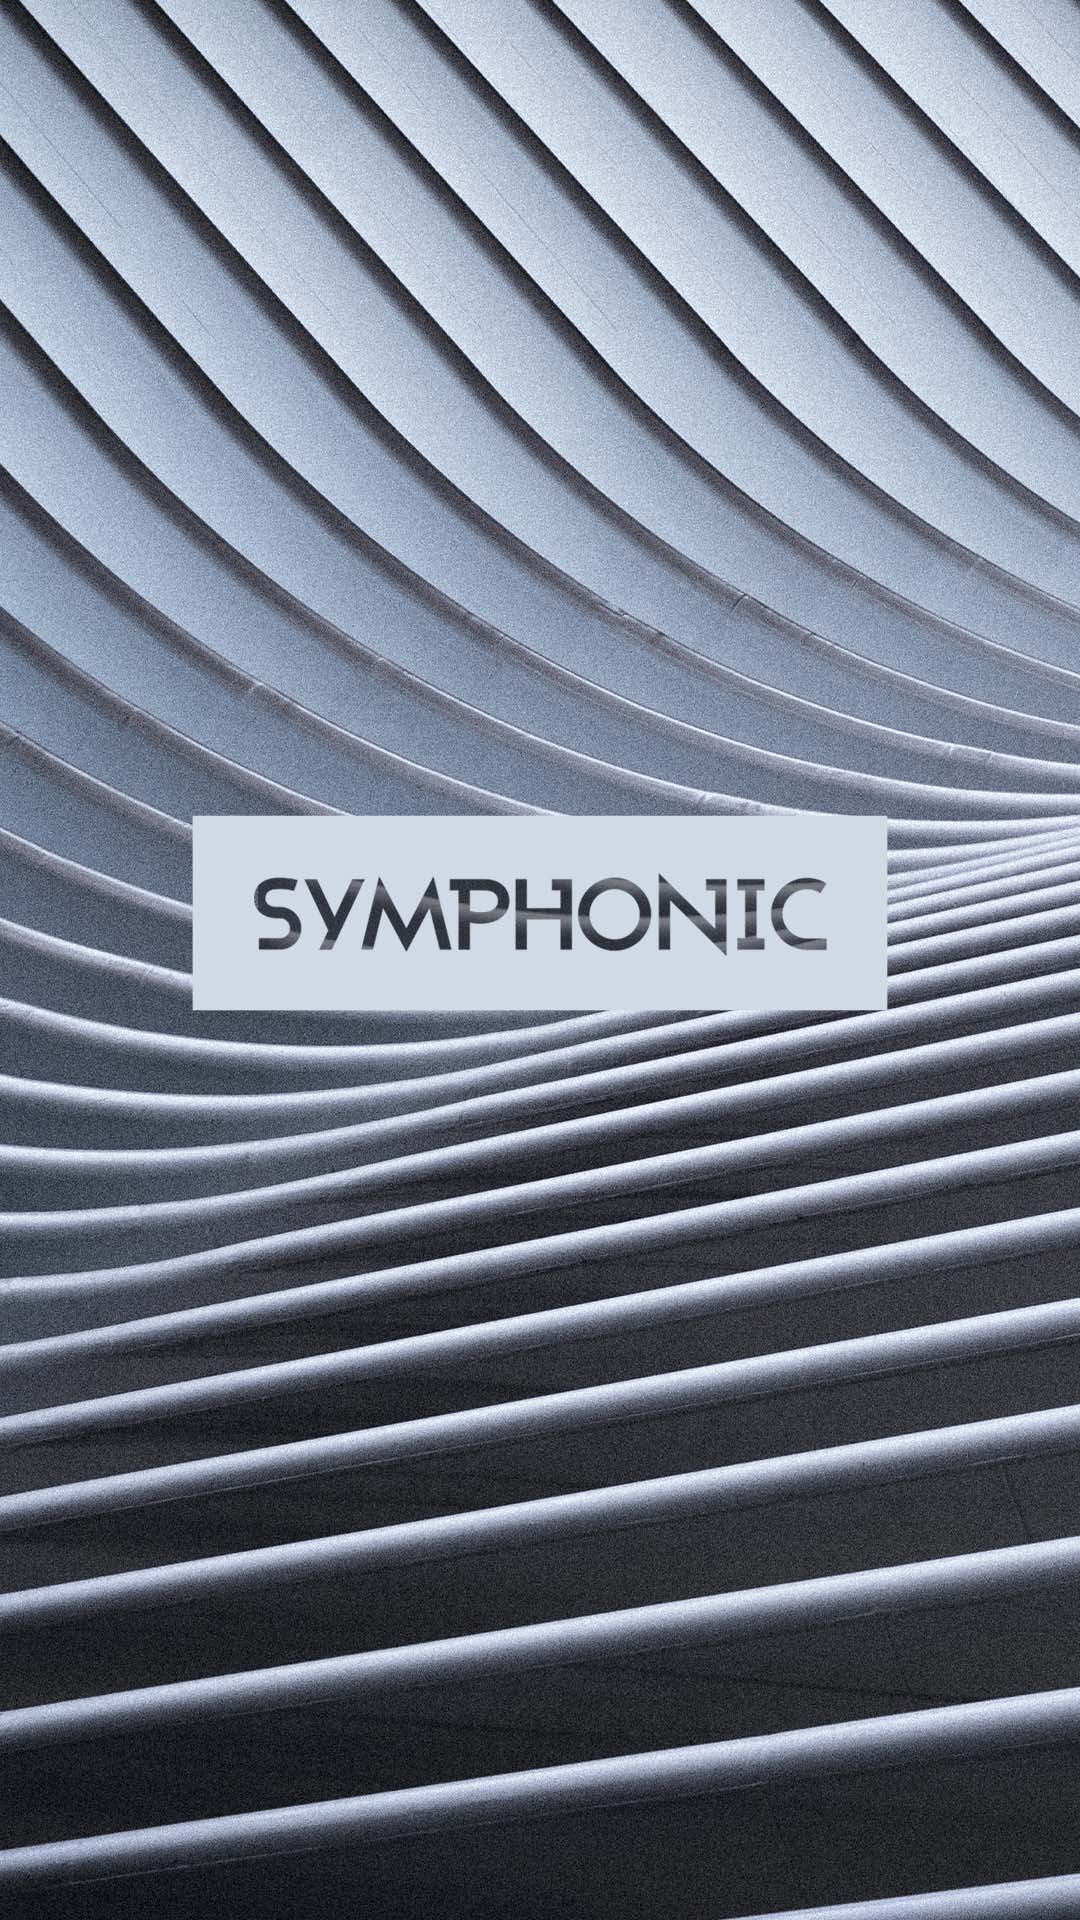 Symphonic Cell background